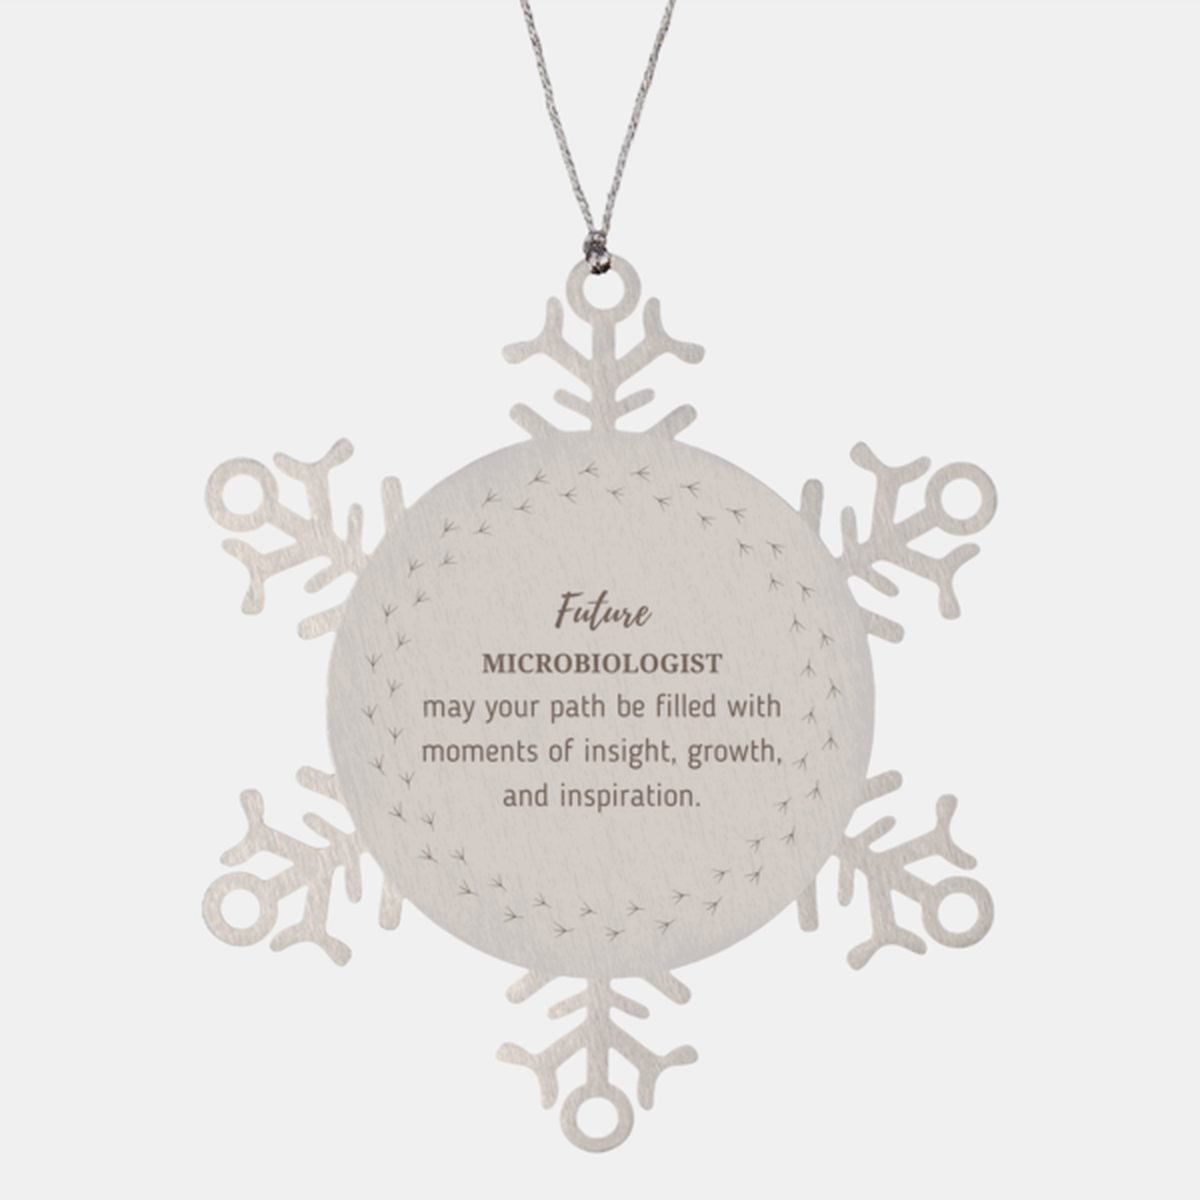 Future Microbiologist Gifts, May your path be filled with moments of insight, Graduation Gifts for New Microbiologist, Christmas Unique Snowflake Ornament For Men, Women, Friends